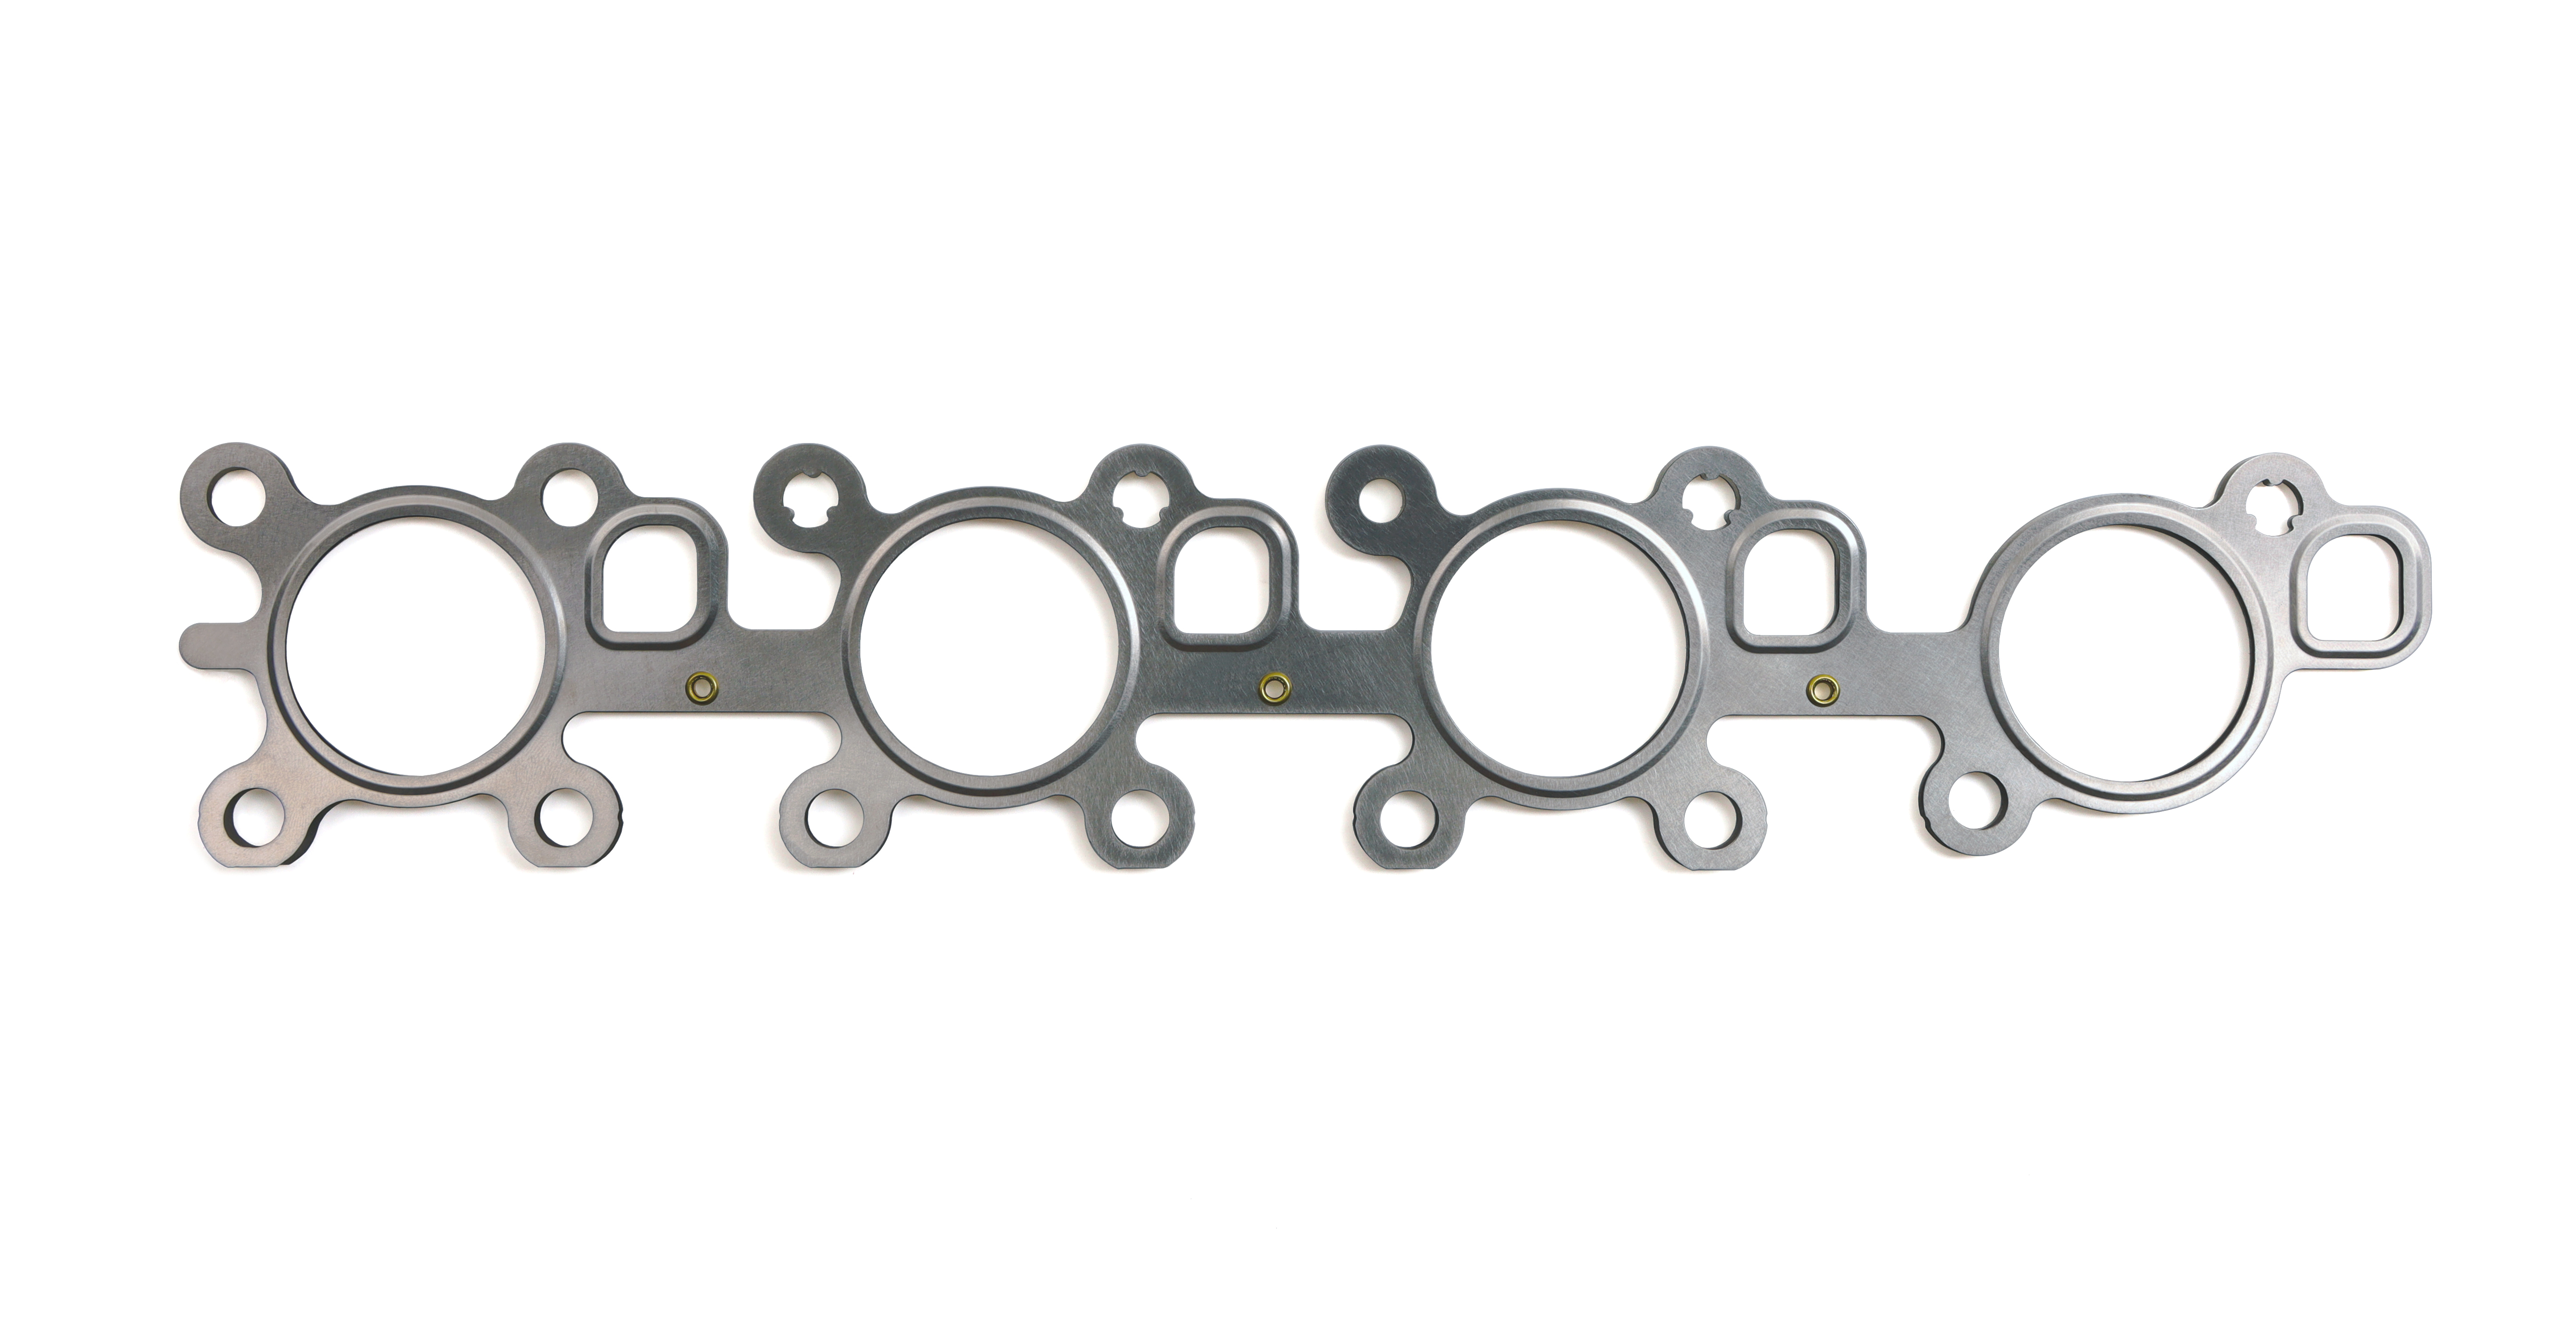 Cometic Gaskets C14125-040 - Exhaust Header / Manifold Gasket, 1.890 in Round Port, Multi-Layer Steel, Toyota V8 2007-19, Each